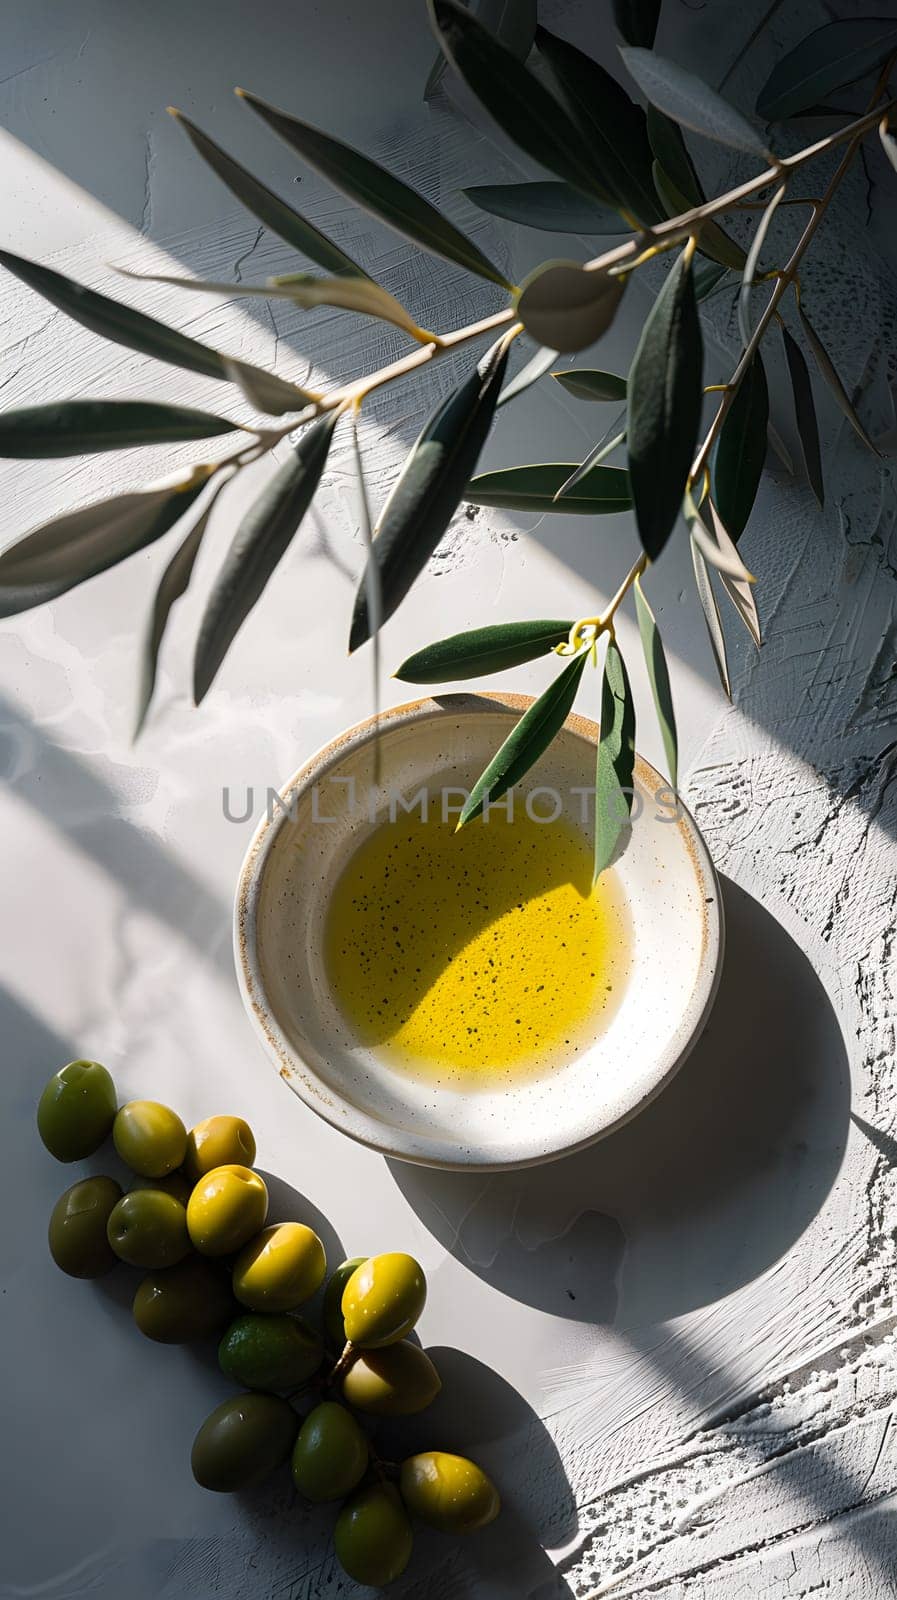 Food ingredients a bowl of olive oil and olives on a table by Nadtochiy